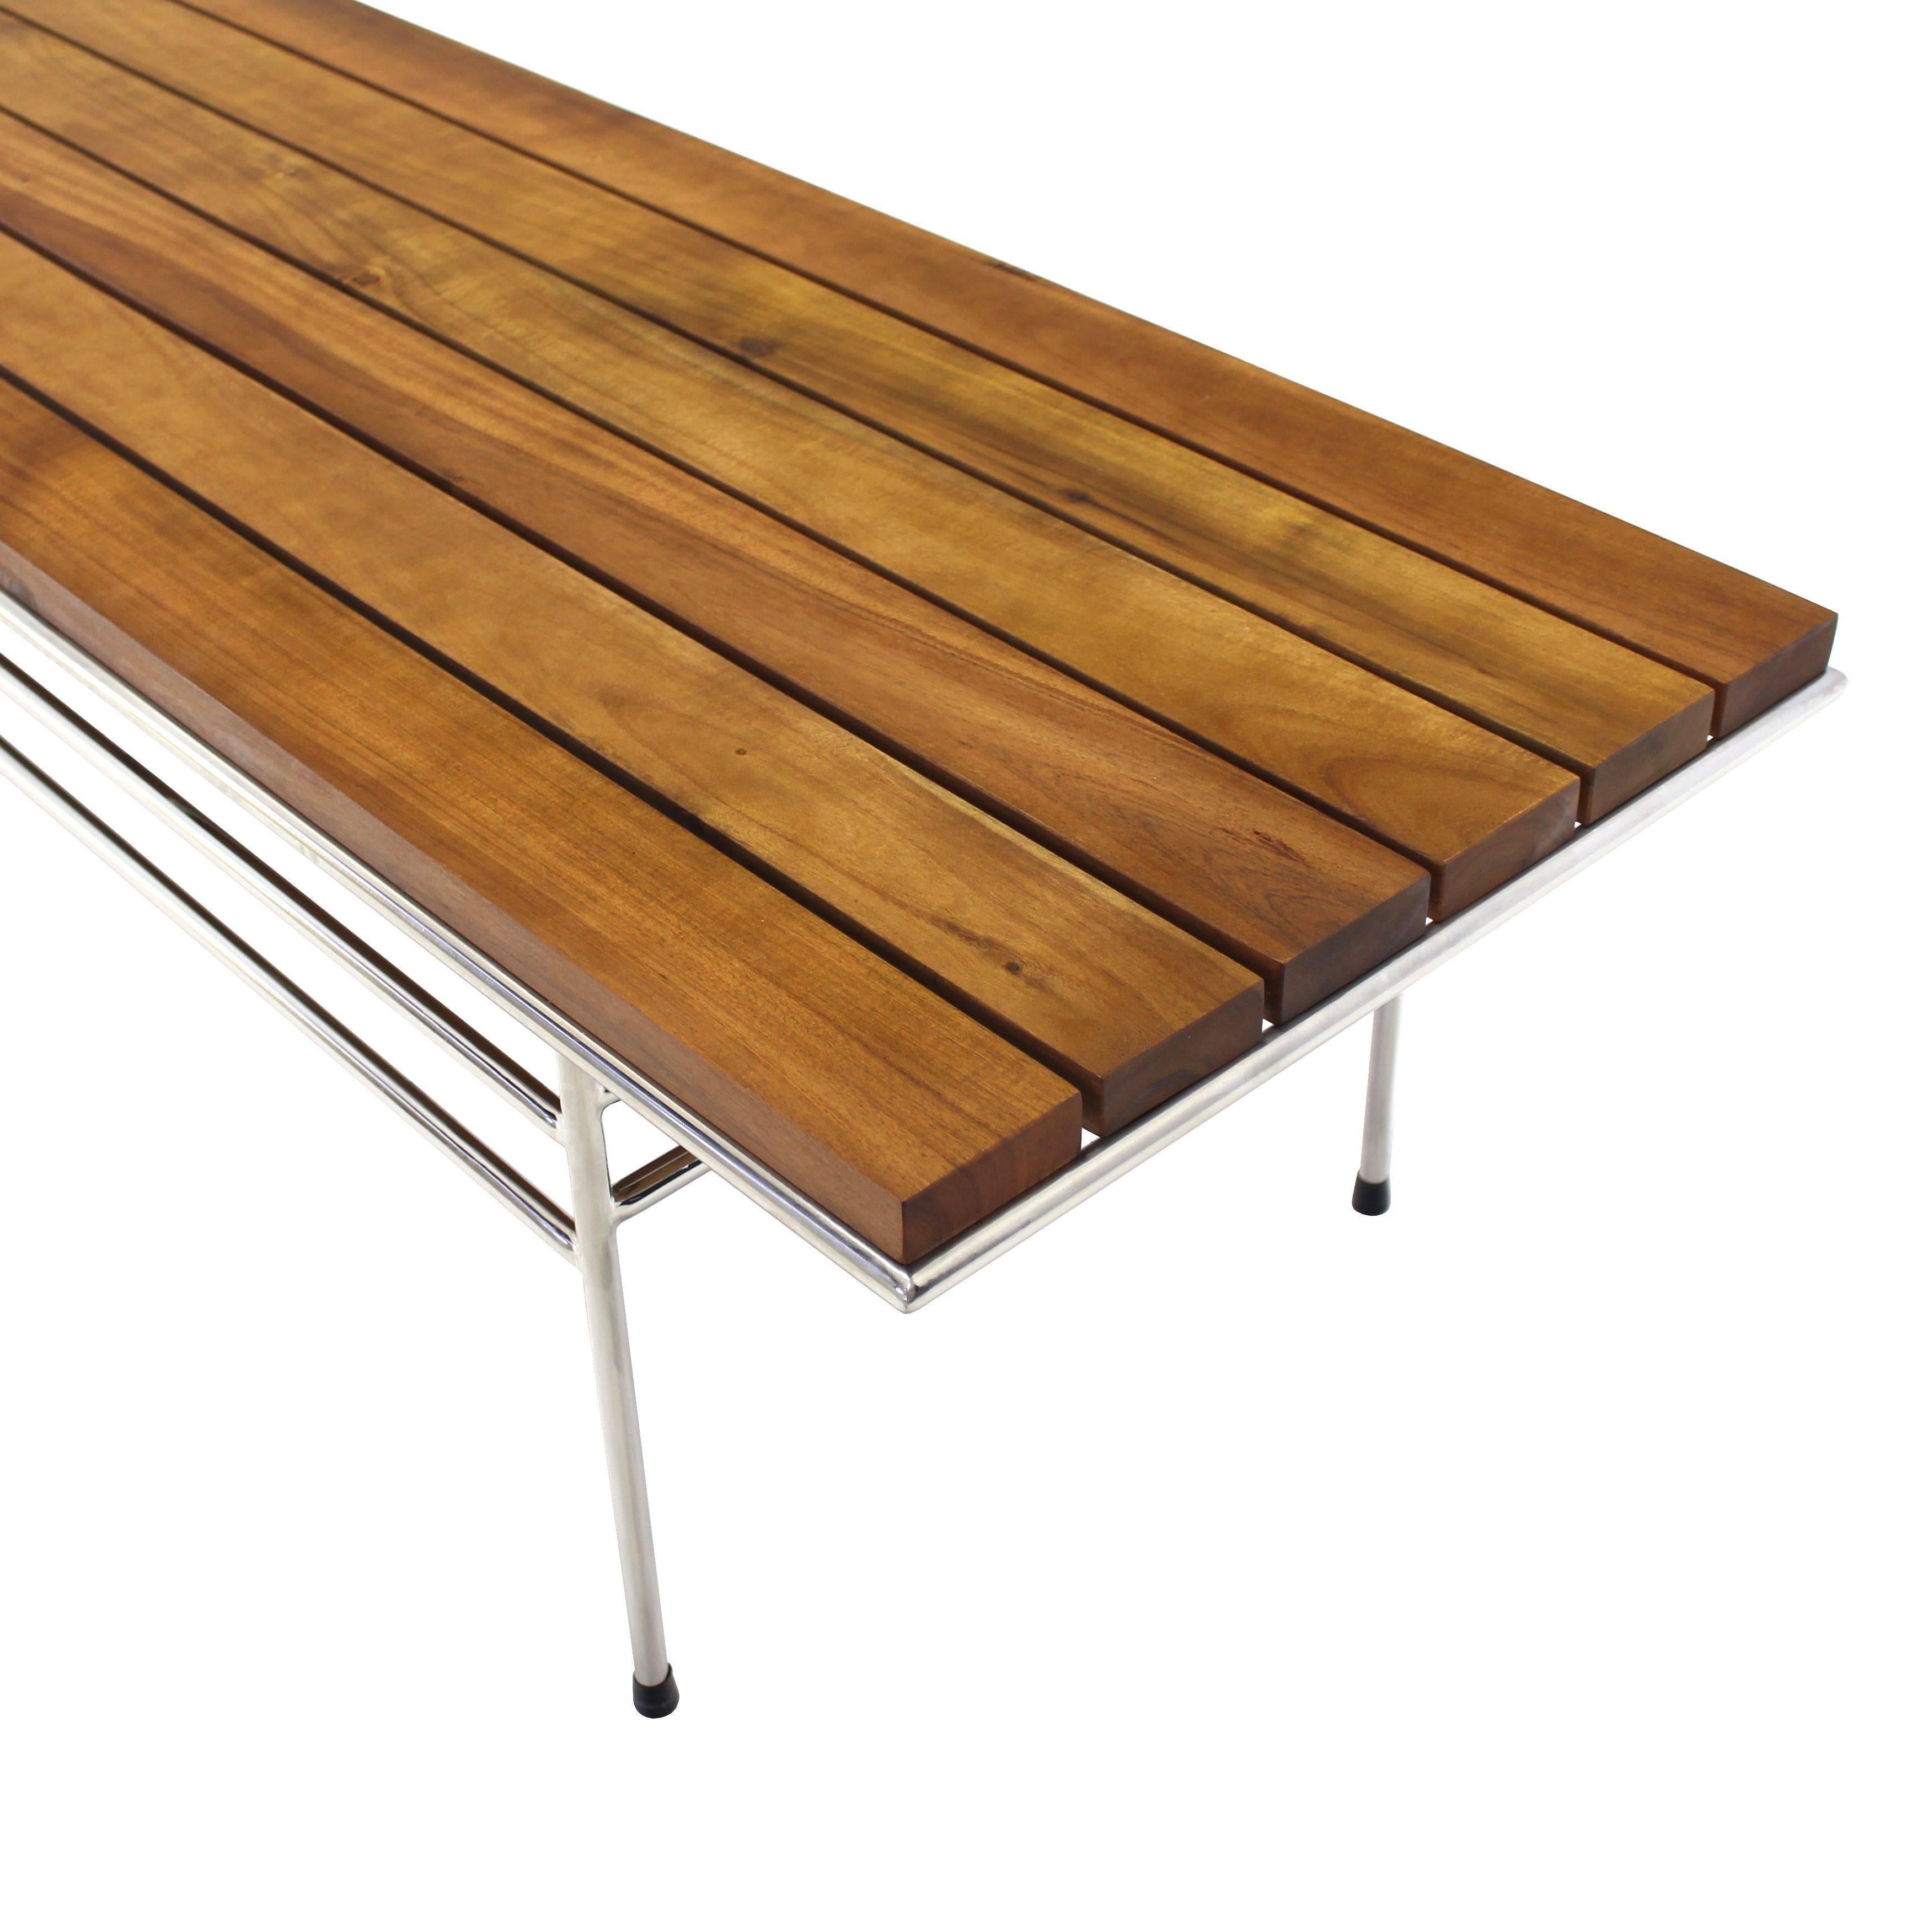 Walnut Solid Oiled Slat Wood Top Chrome Bench For Sale